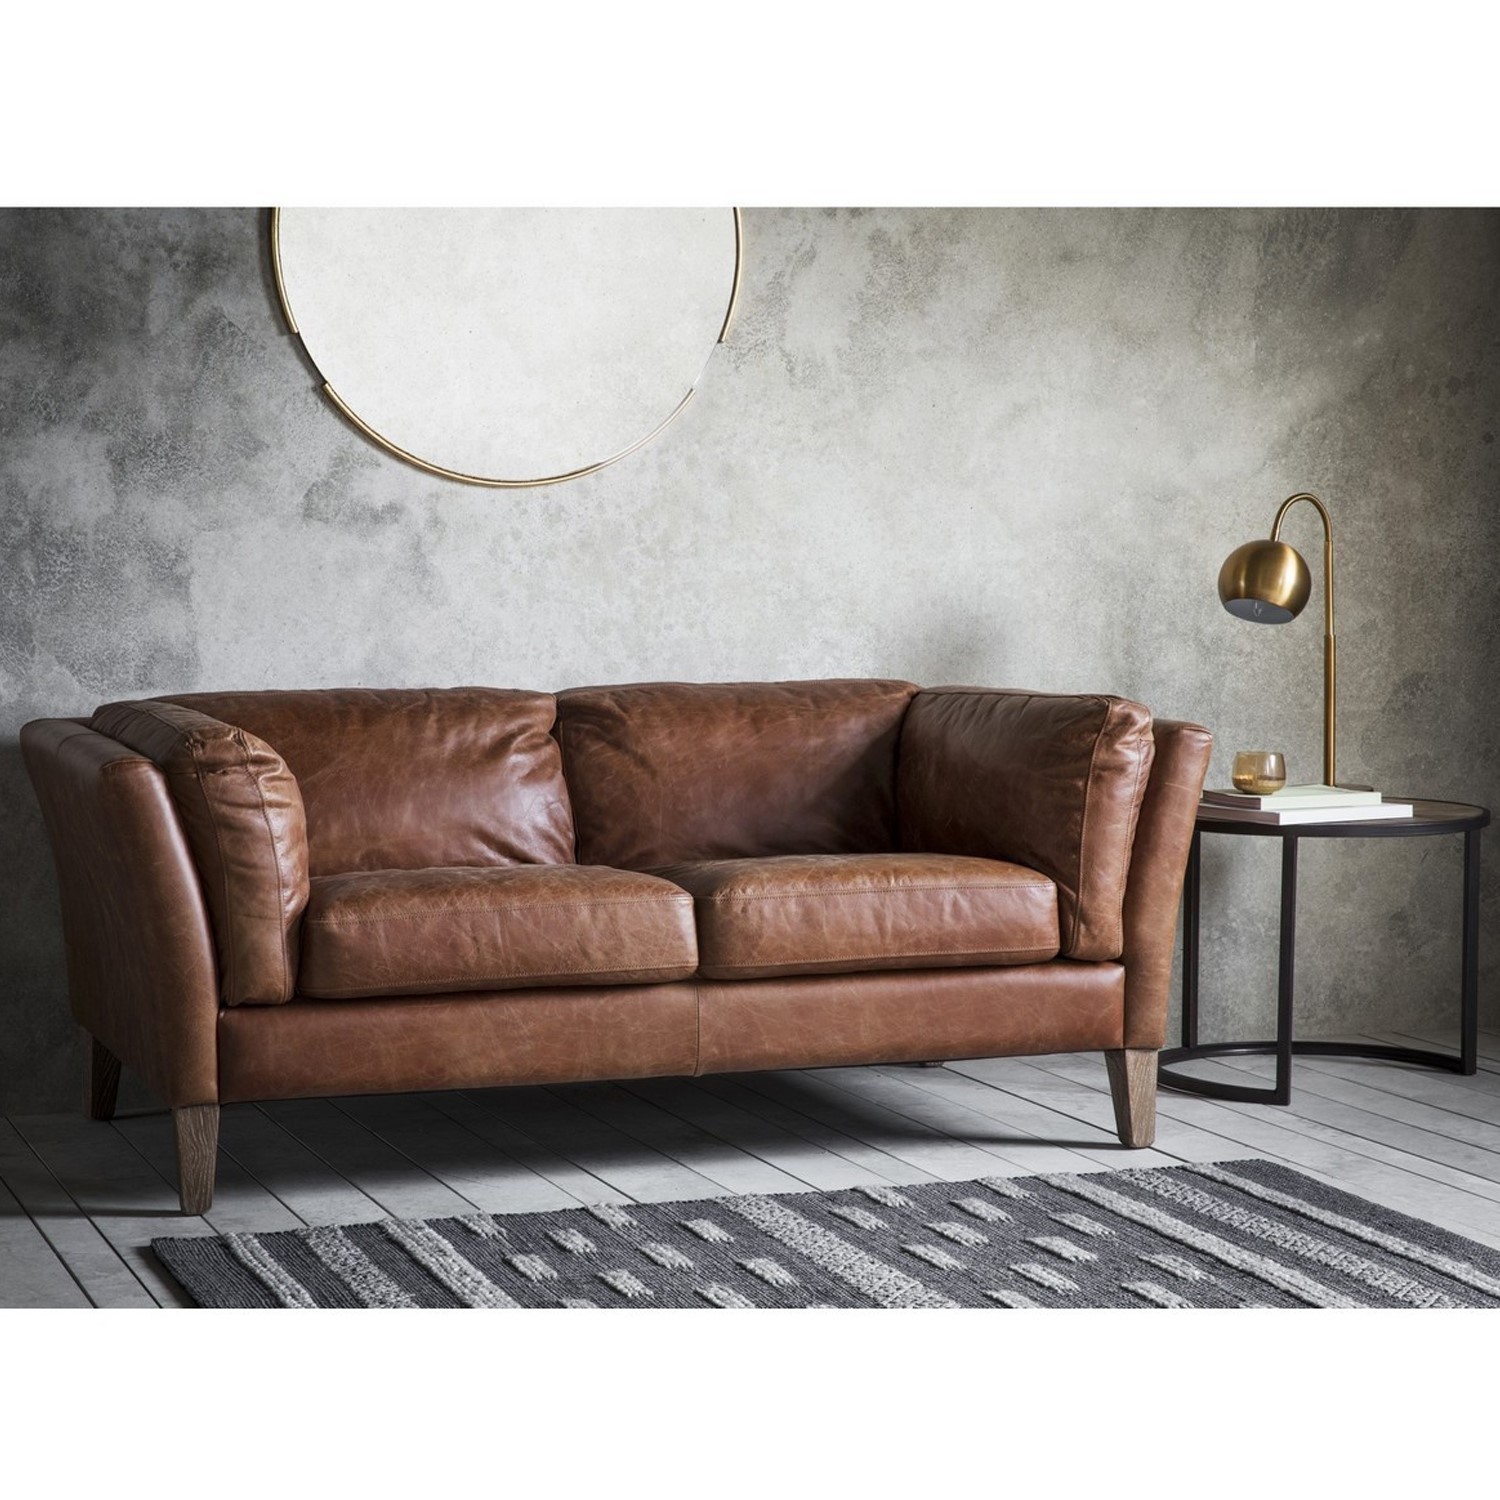 Gallery Vintage Brown Leather Sofa, Brown Leather Settee